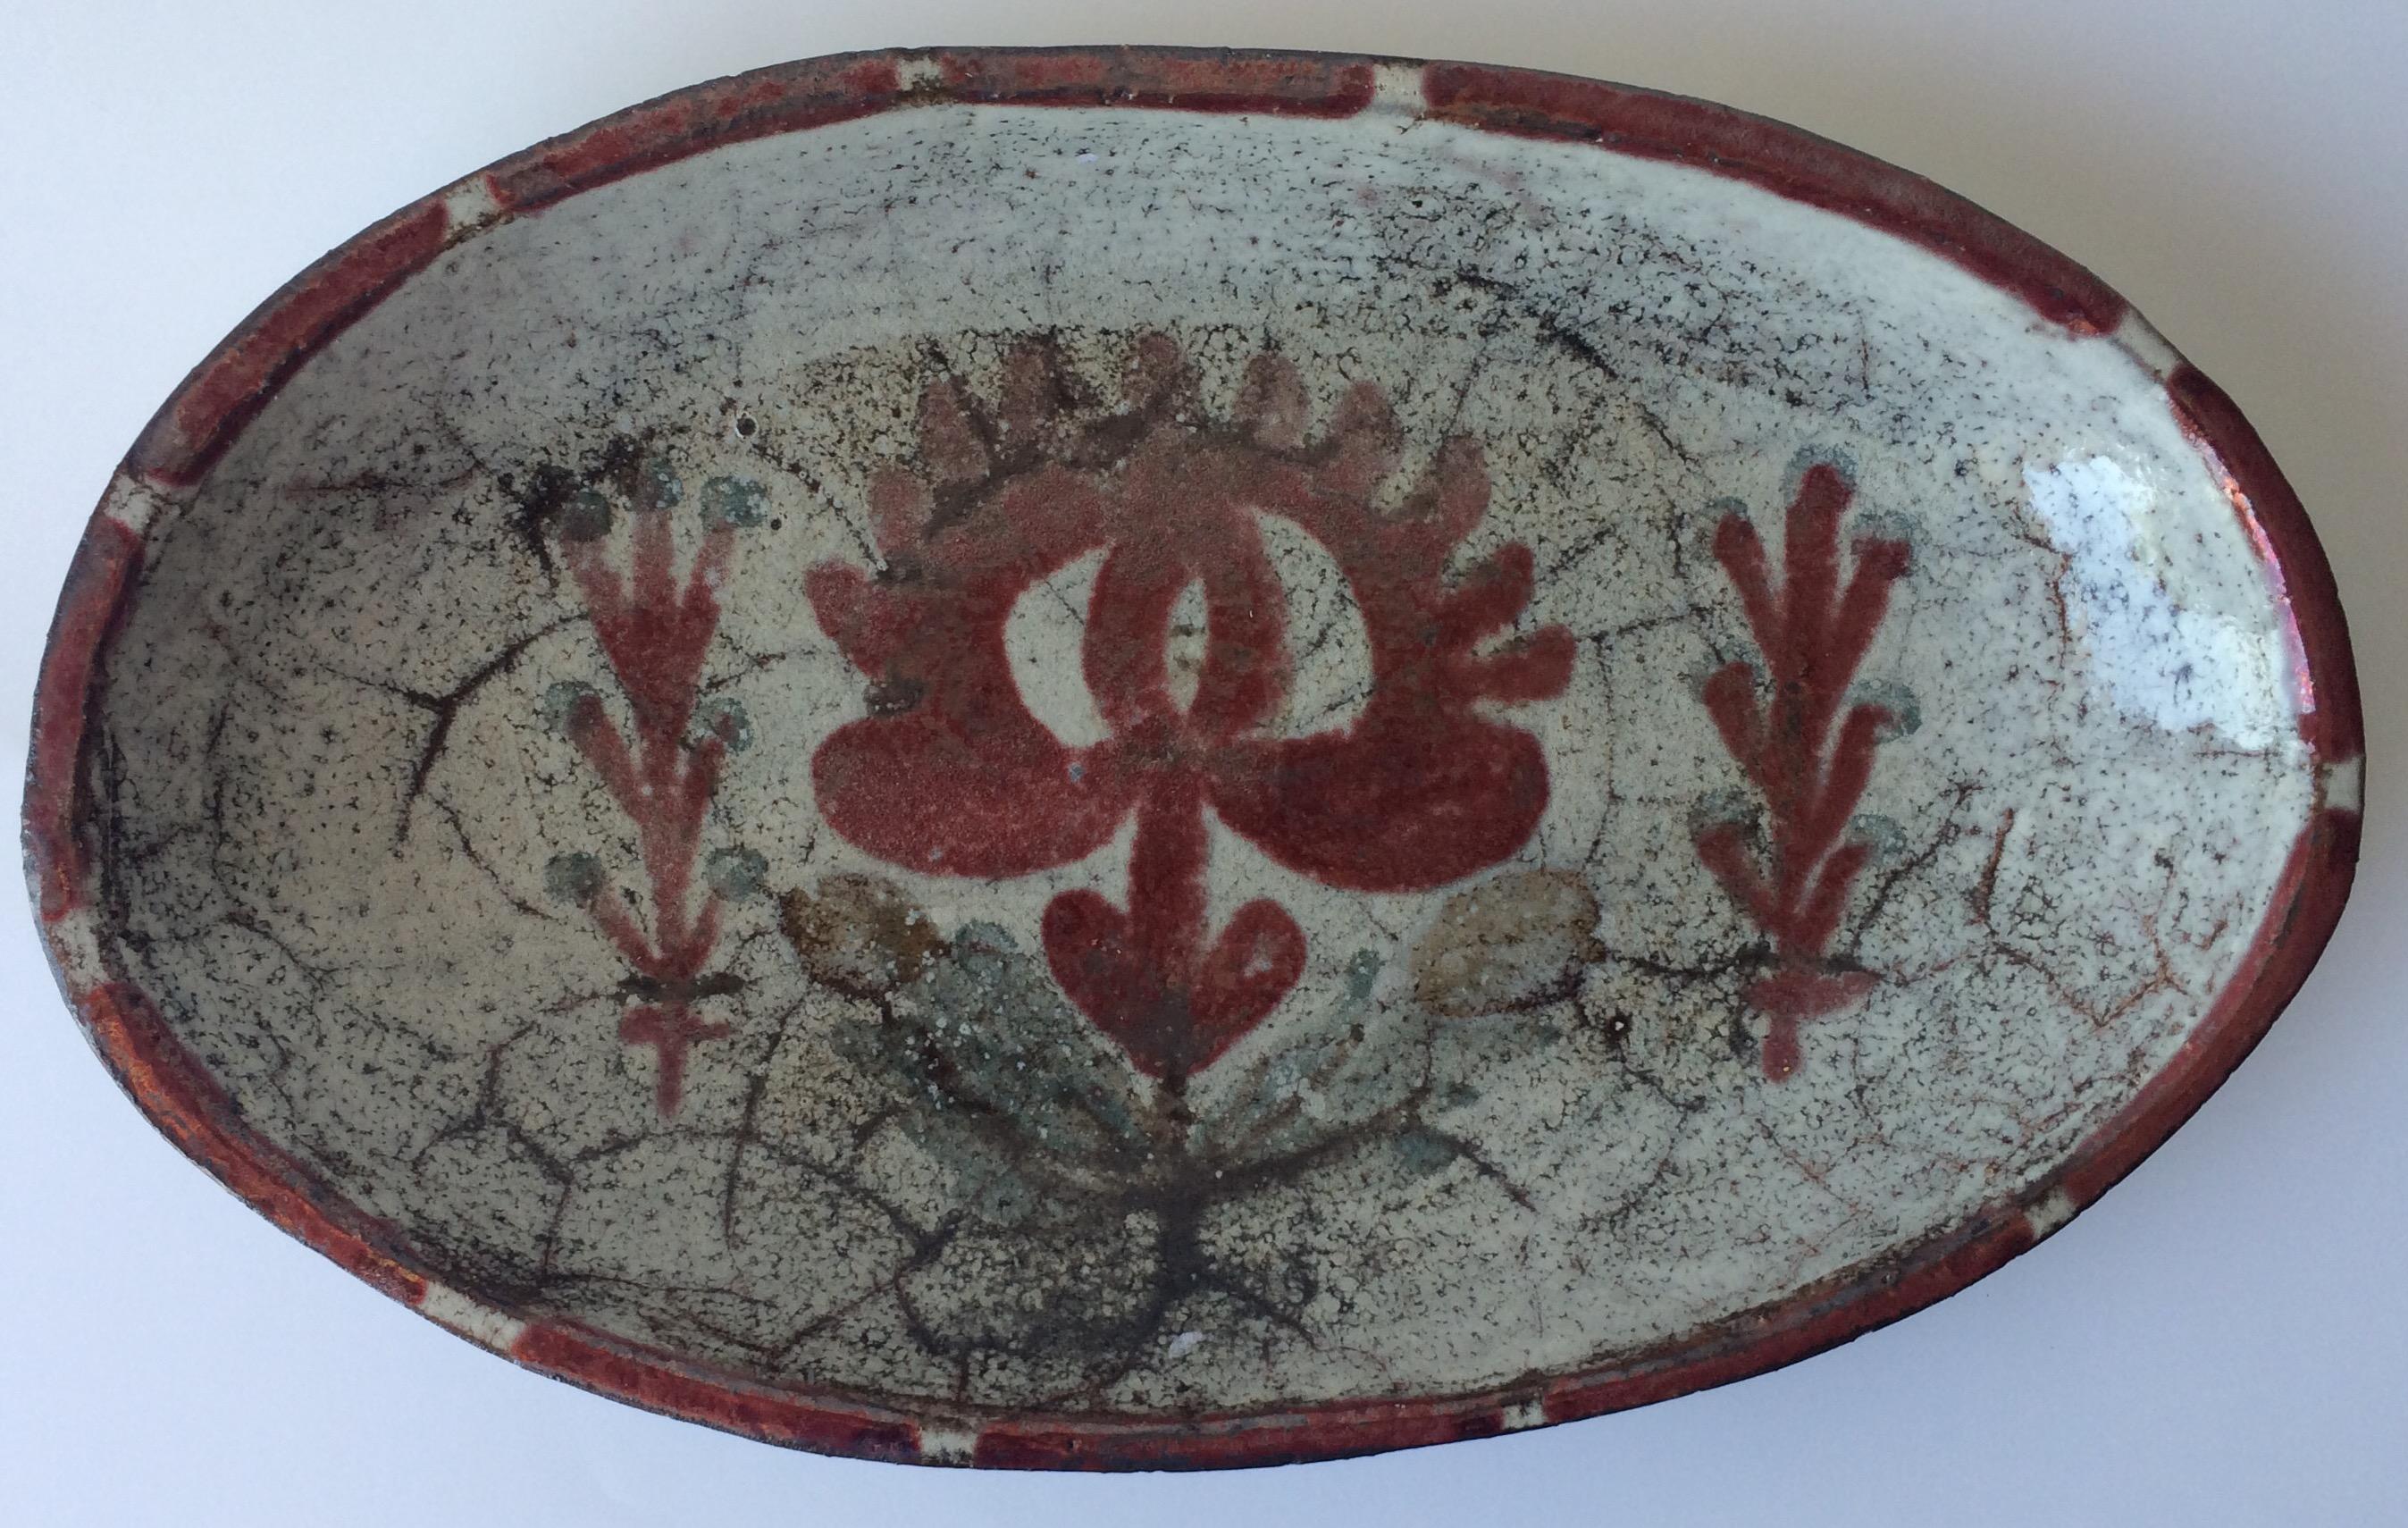 Beautiful midcentury handcrafted bowl by Gustave Reynaud for Atelier Le Murier.
Earthenware decorated with scarifications on gray enamel and red copper.
Wood firing.
Hand written signature under the base.
Wonderful form. 

Gustave Reynaud was